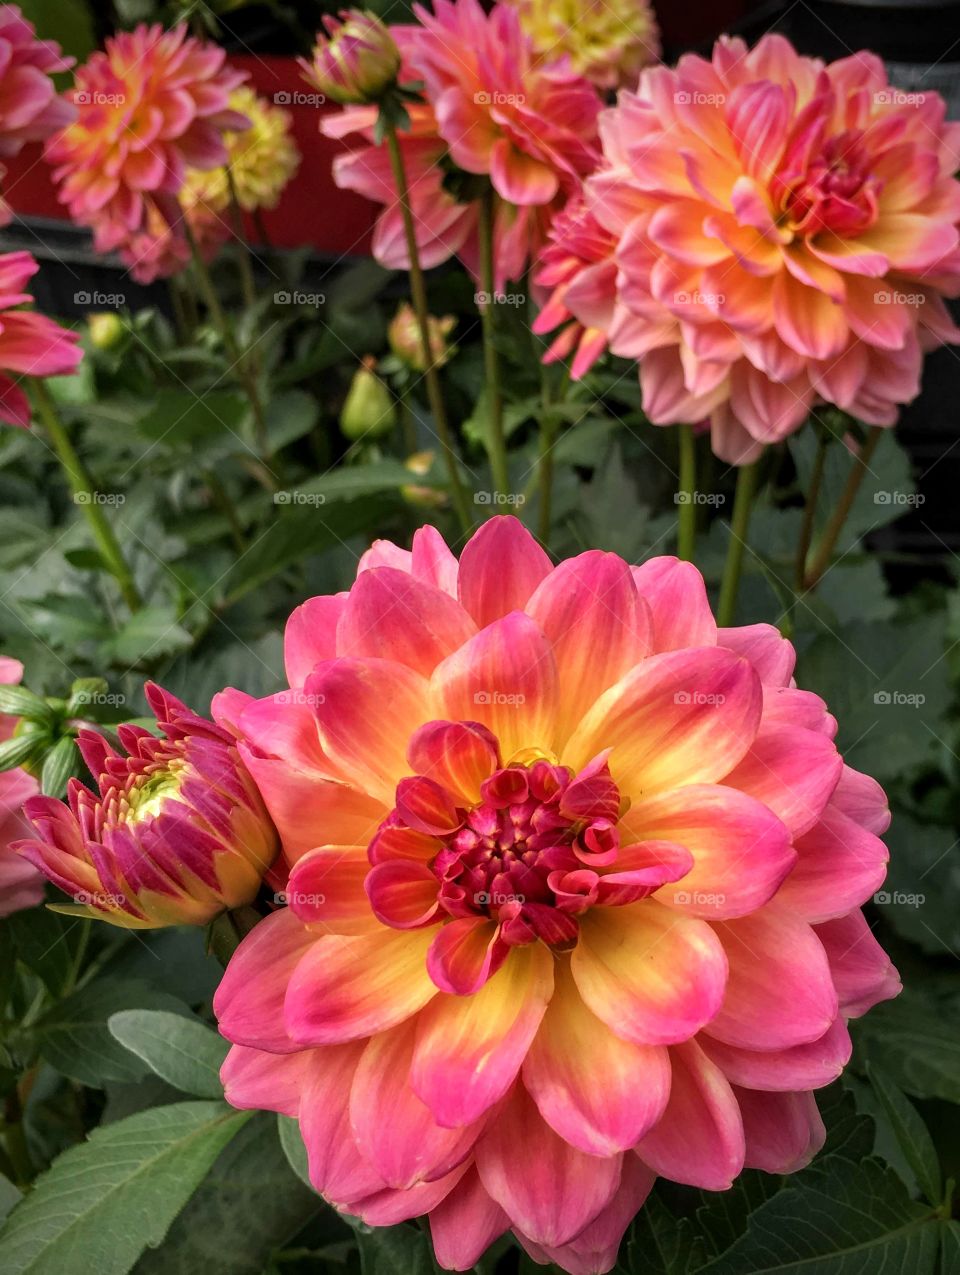 This flower has really stolen my heart in one look. 